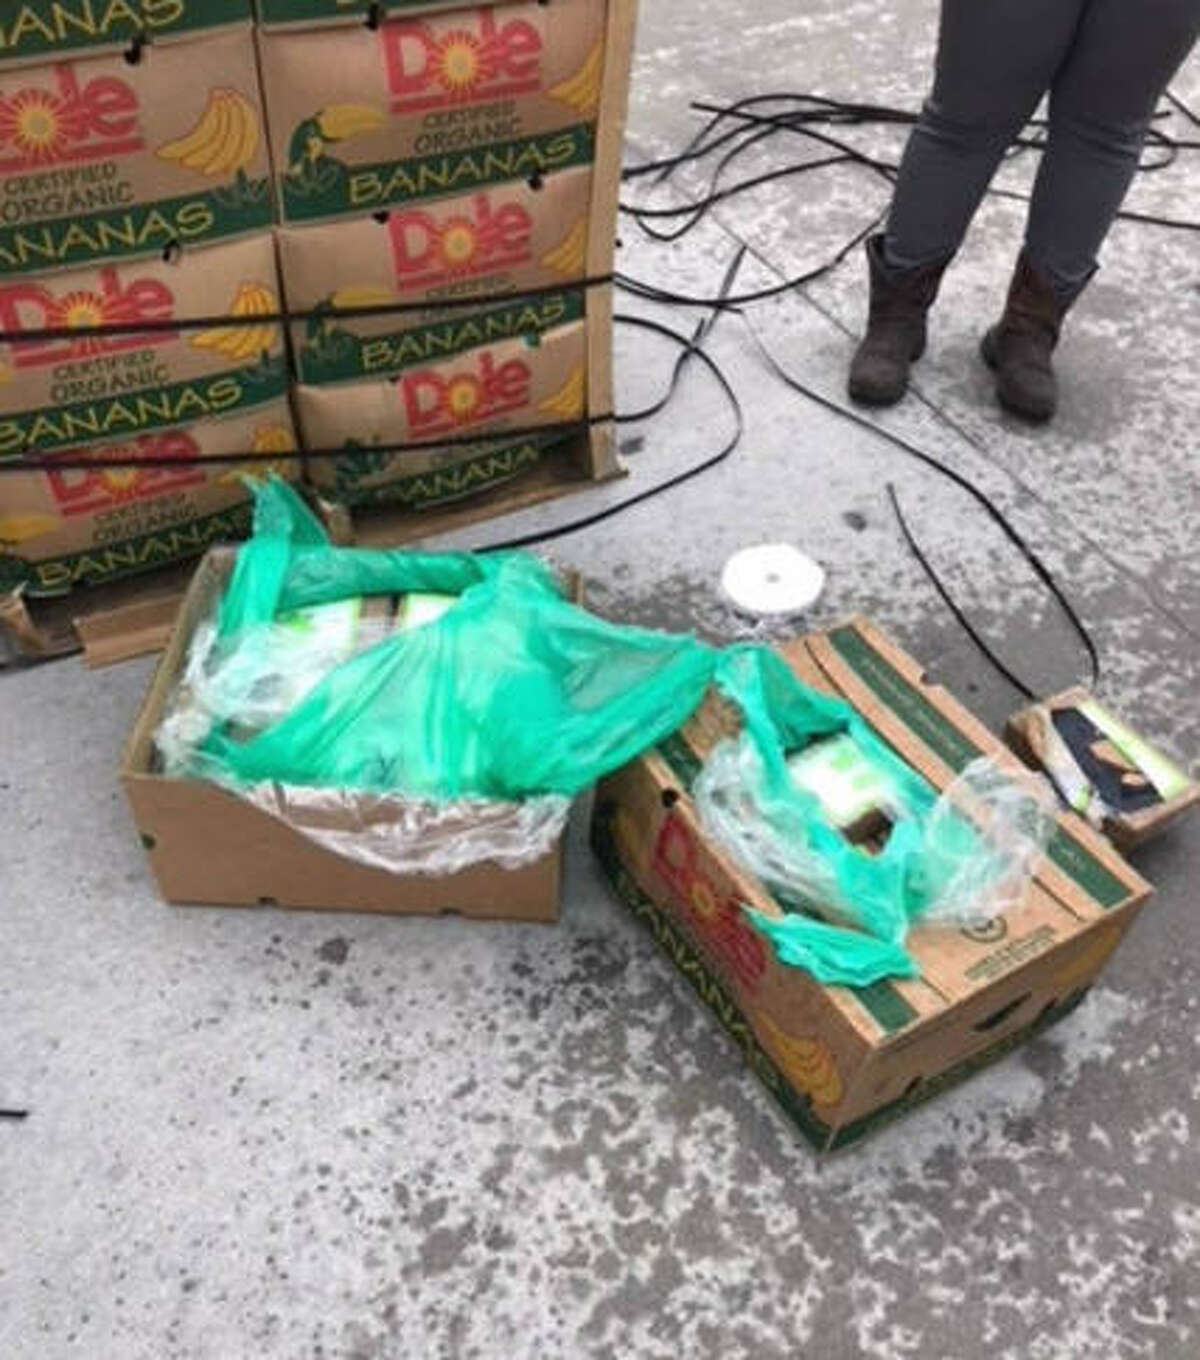 Prison guards uncovered $17.8 million of cocaine hidden in a shipment of donated bananas.